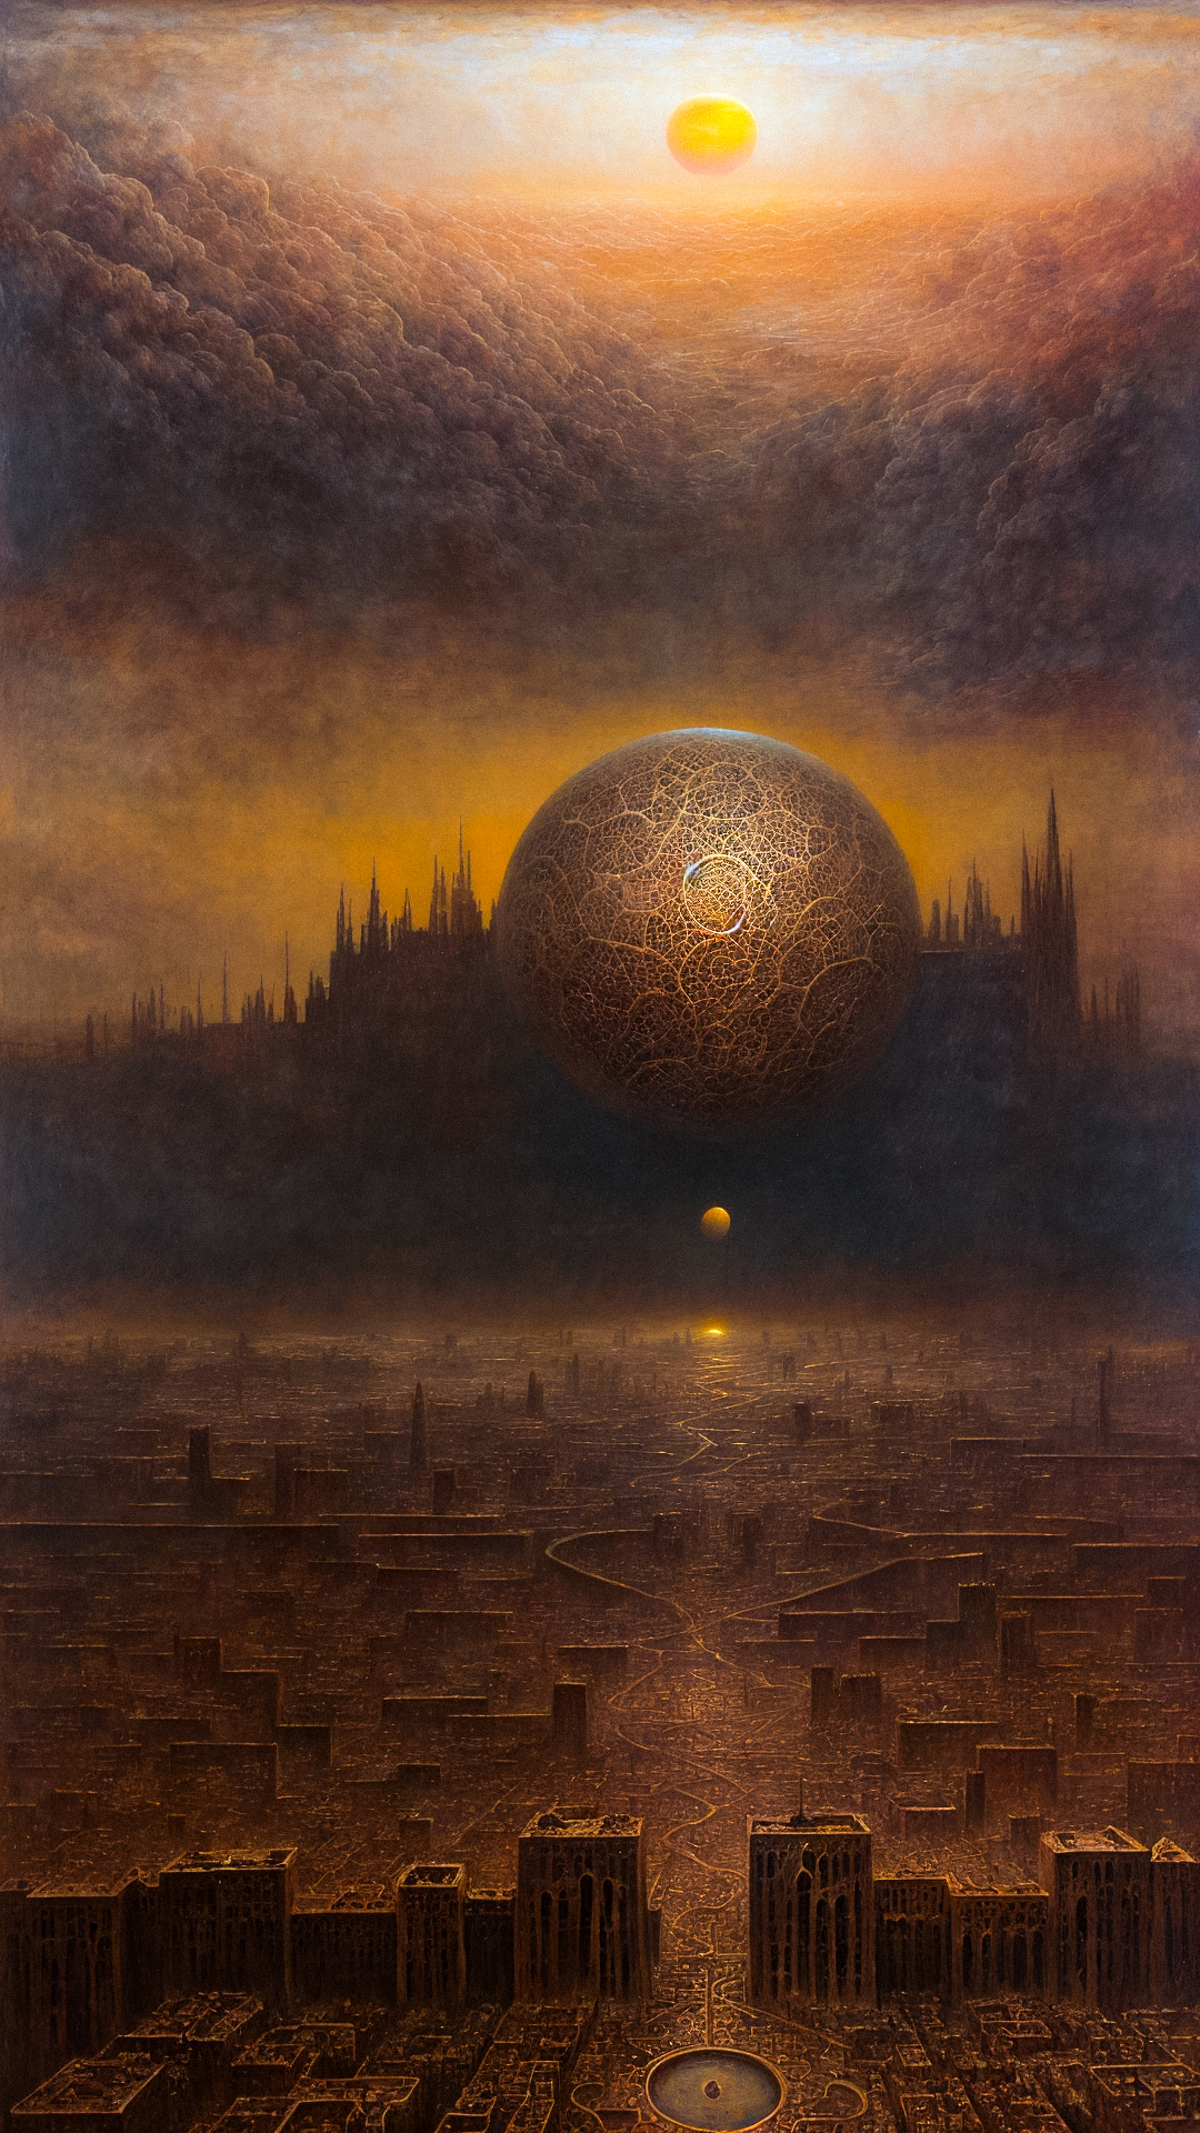 A dark cityscape with a glowing moon and a large, intricate sphere.